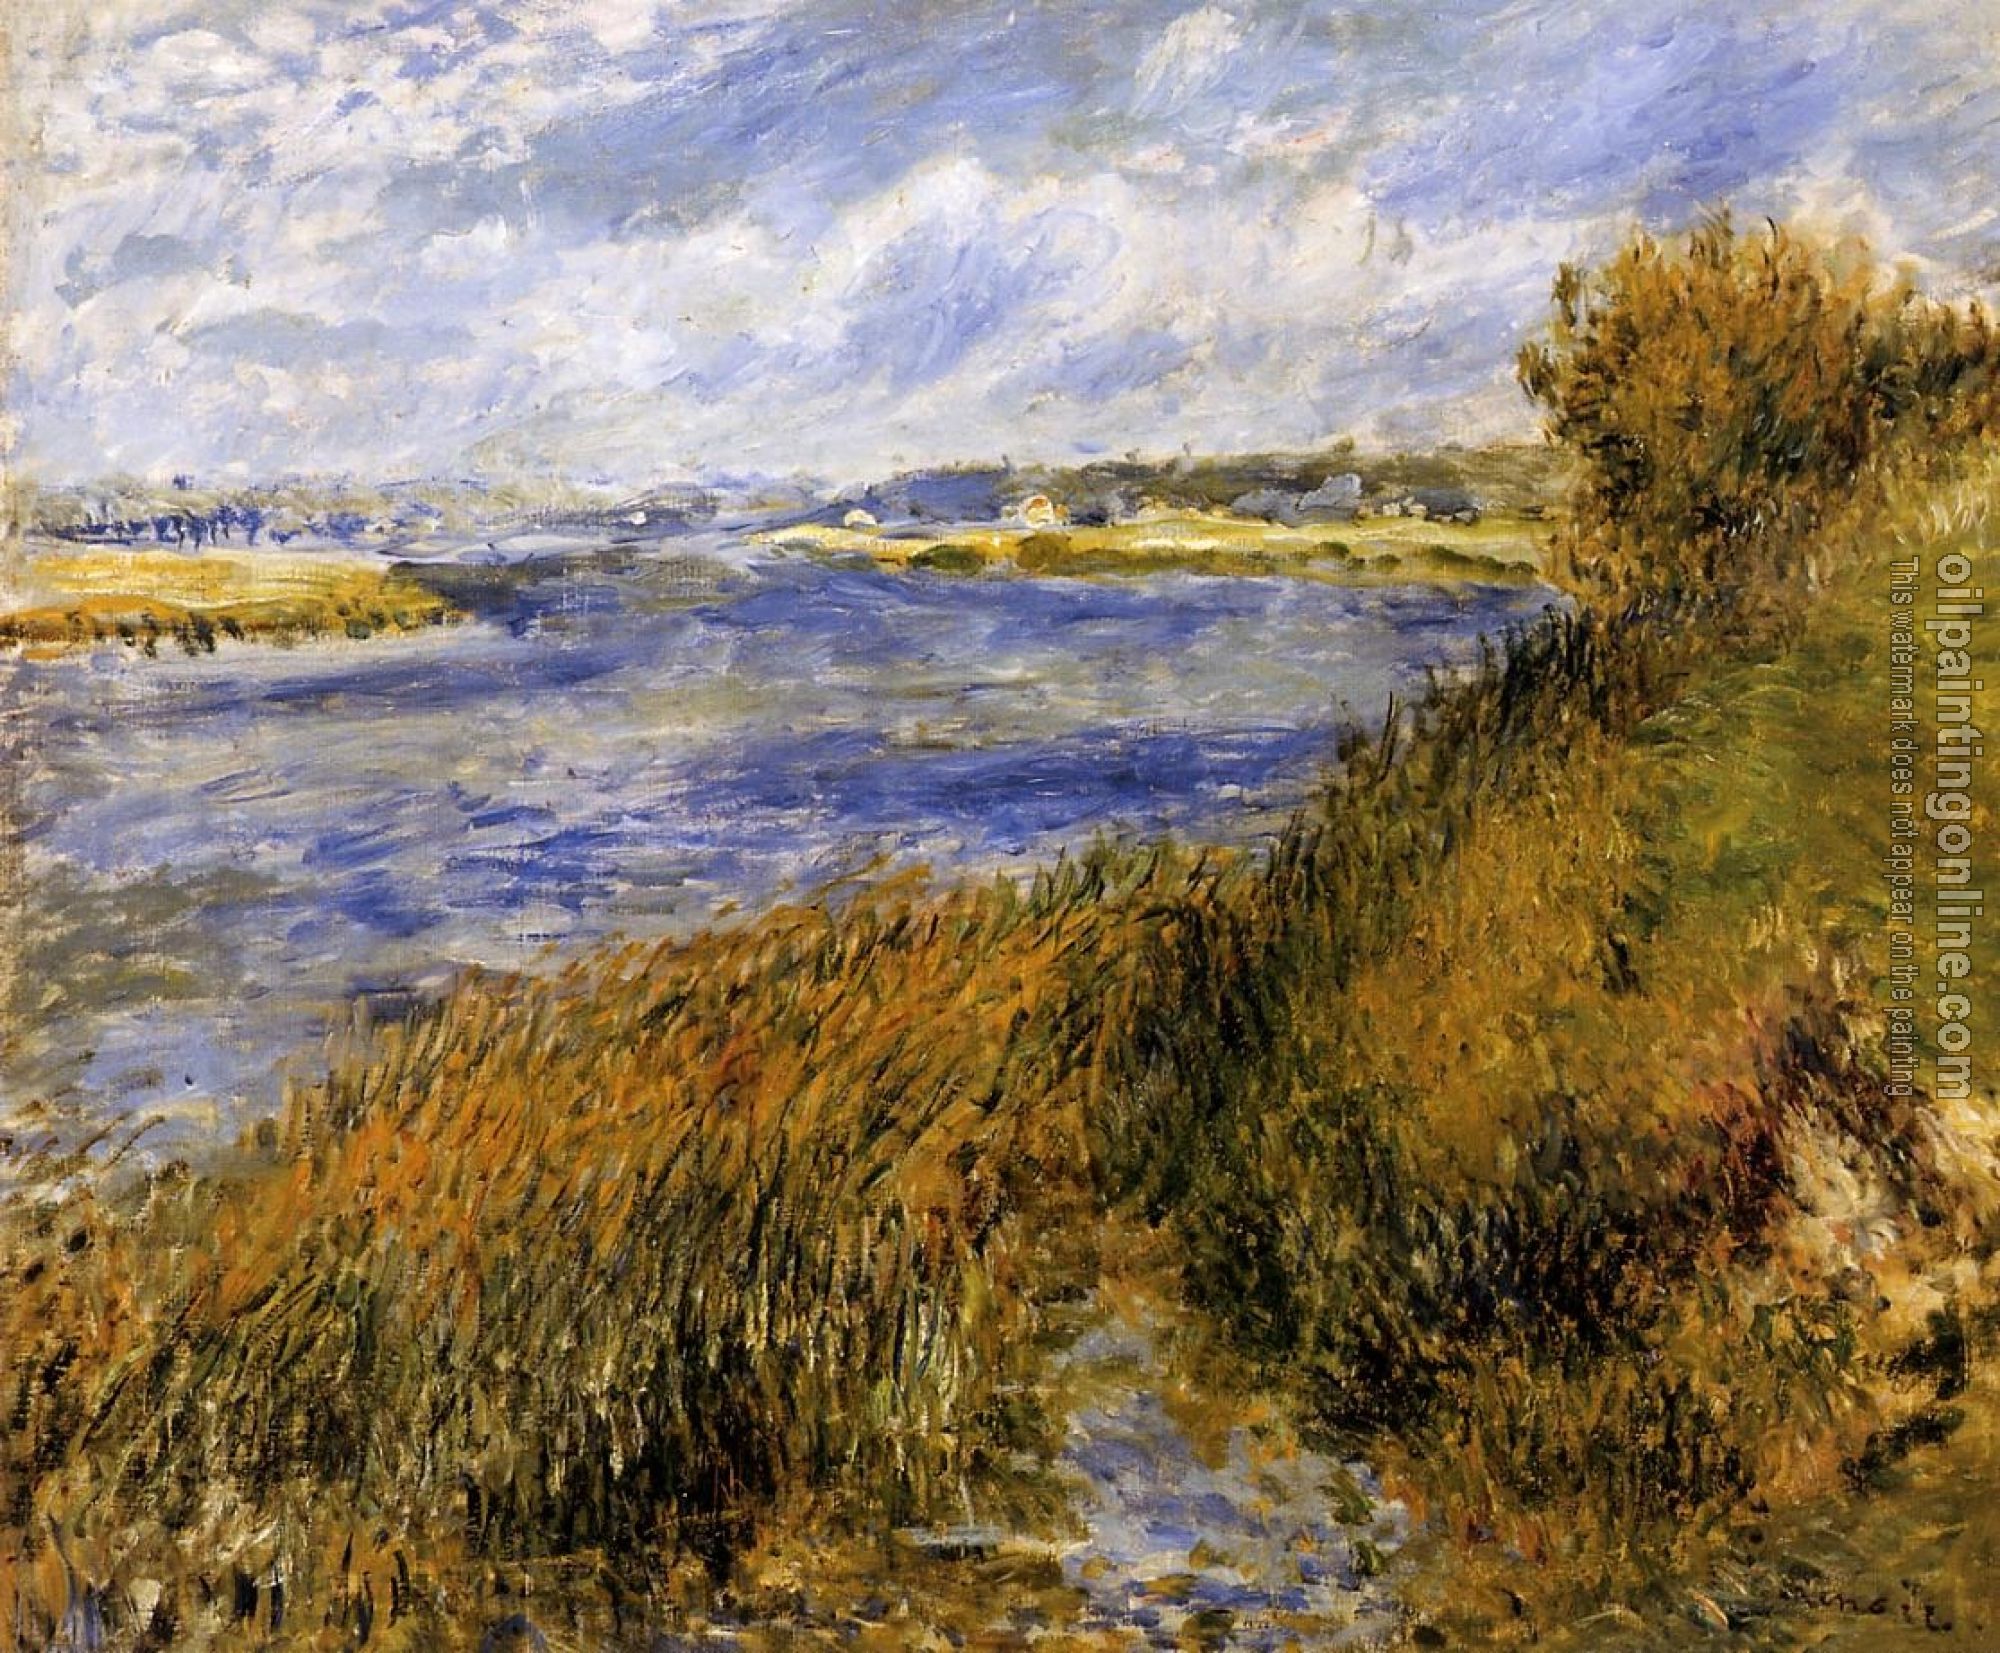 Renoir, Pierre Auguste - The Banks of the Seine at Champrosay